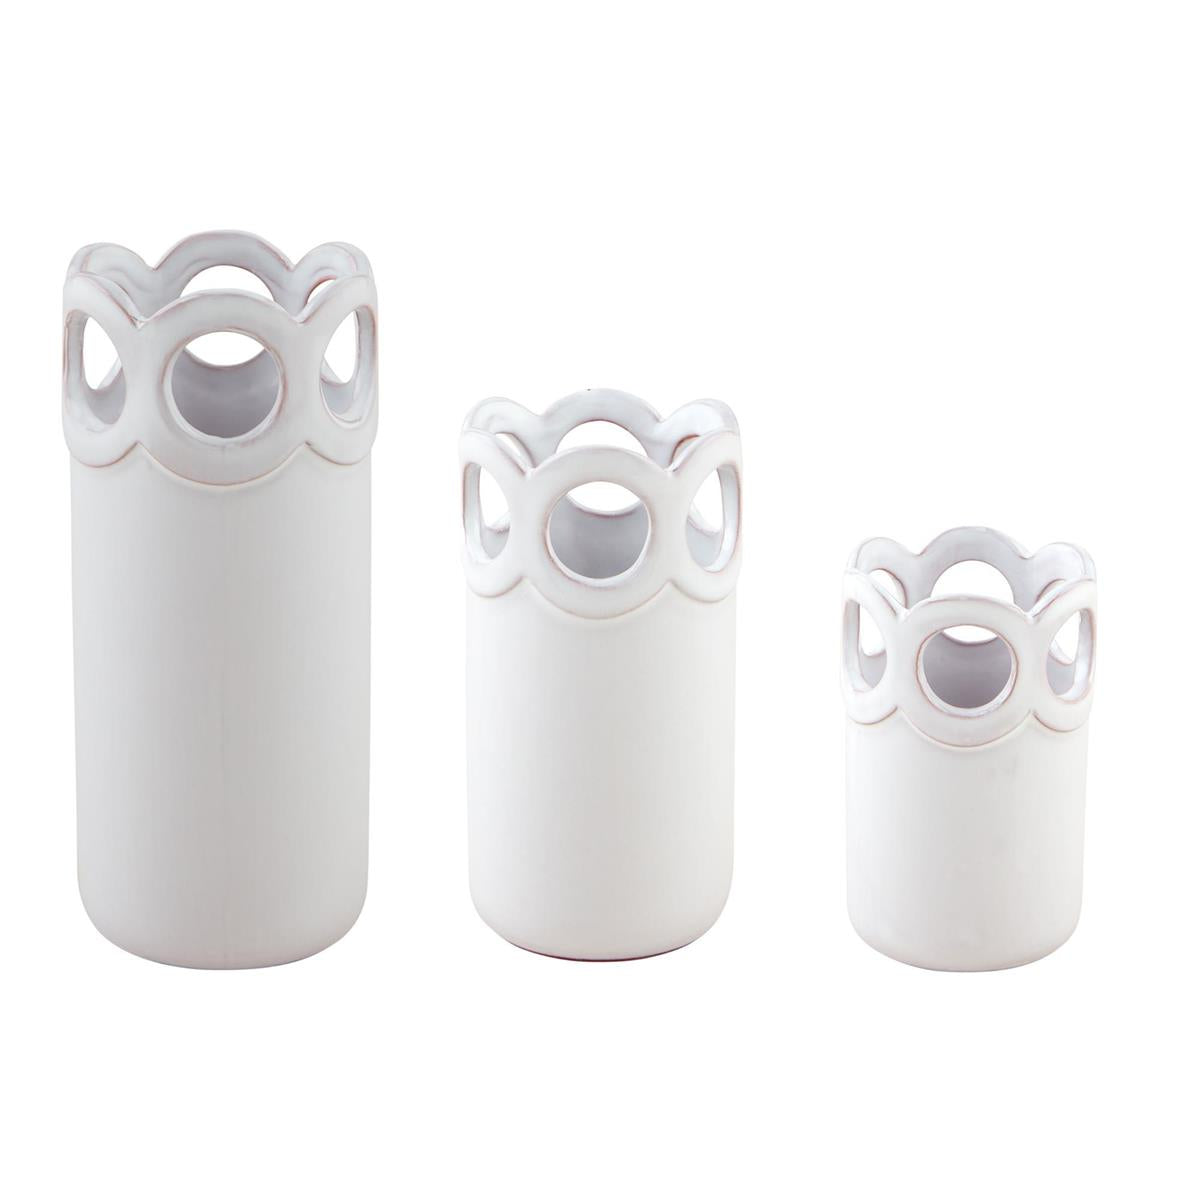 all three sizes of the scalloped bud vases on a white background